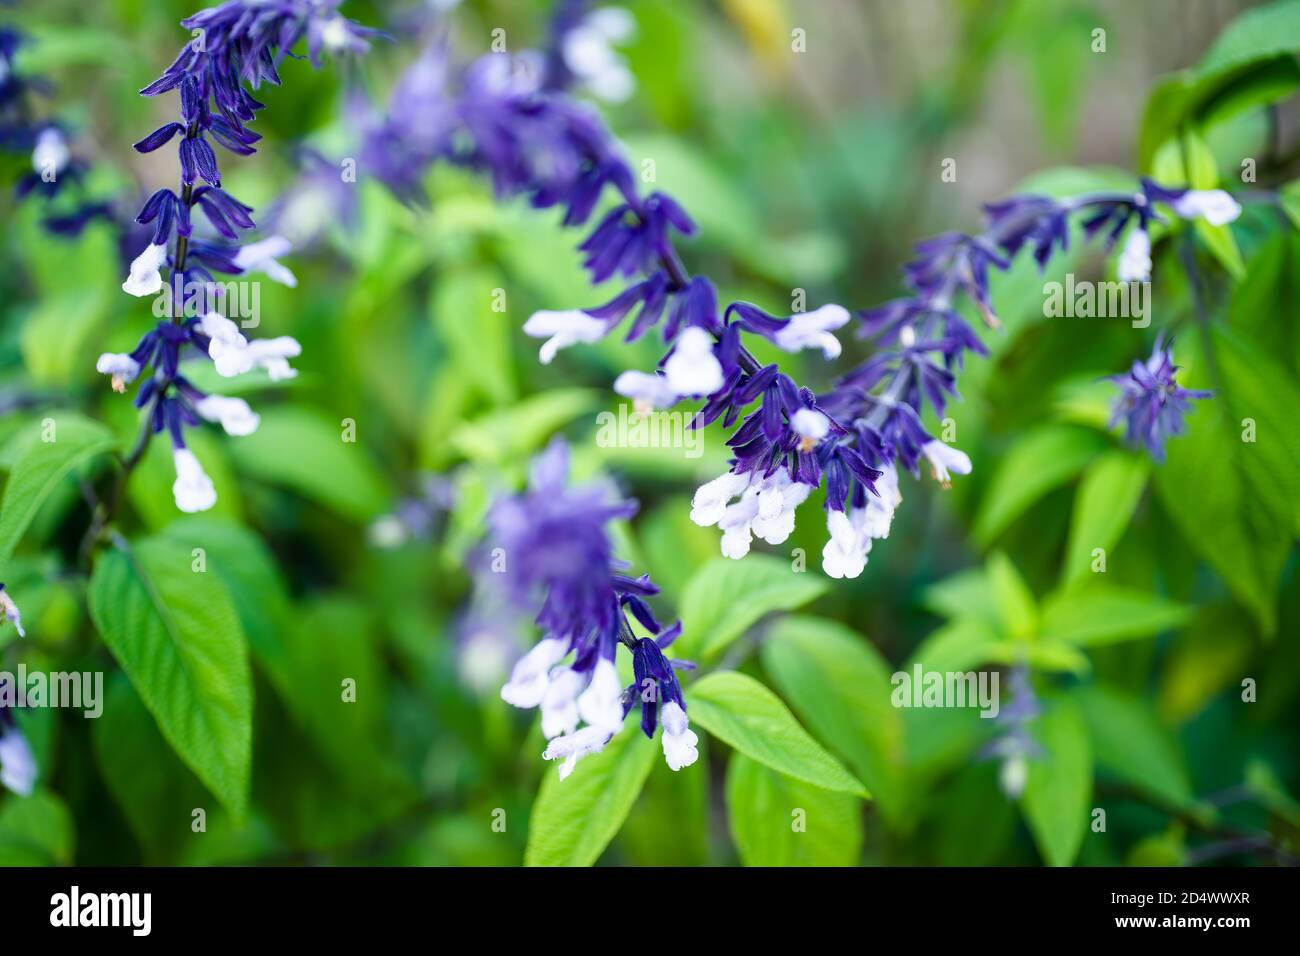 White and blue sage (Salvia 'Phyllis Fancy') flowers with brachteae in October with a blurred background of green leaves Stock Photo